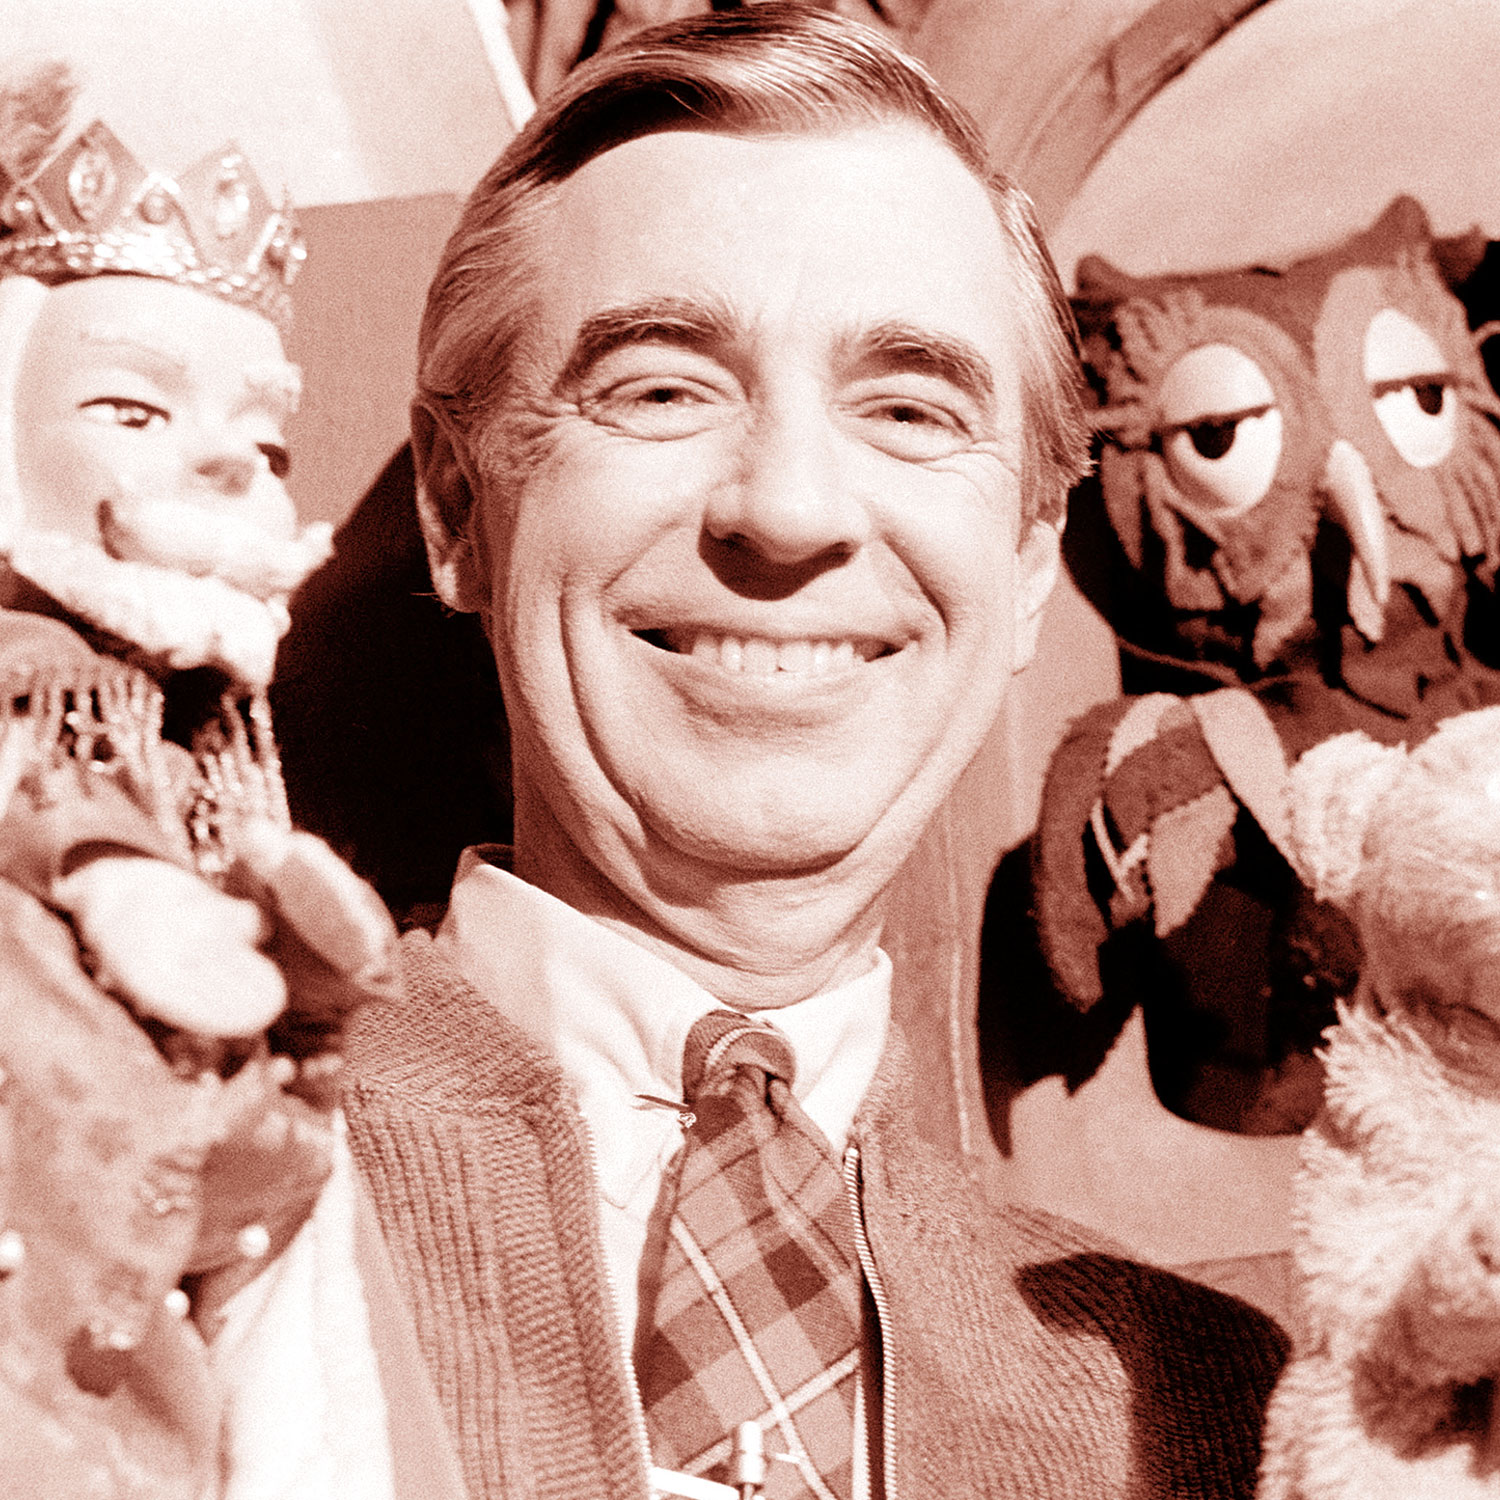 How Pittsburgh's Mister Rogers talked to children about tragedy